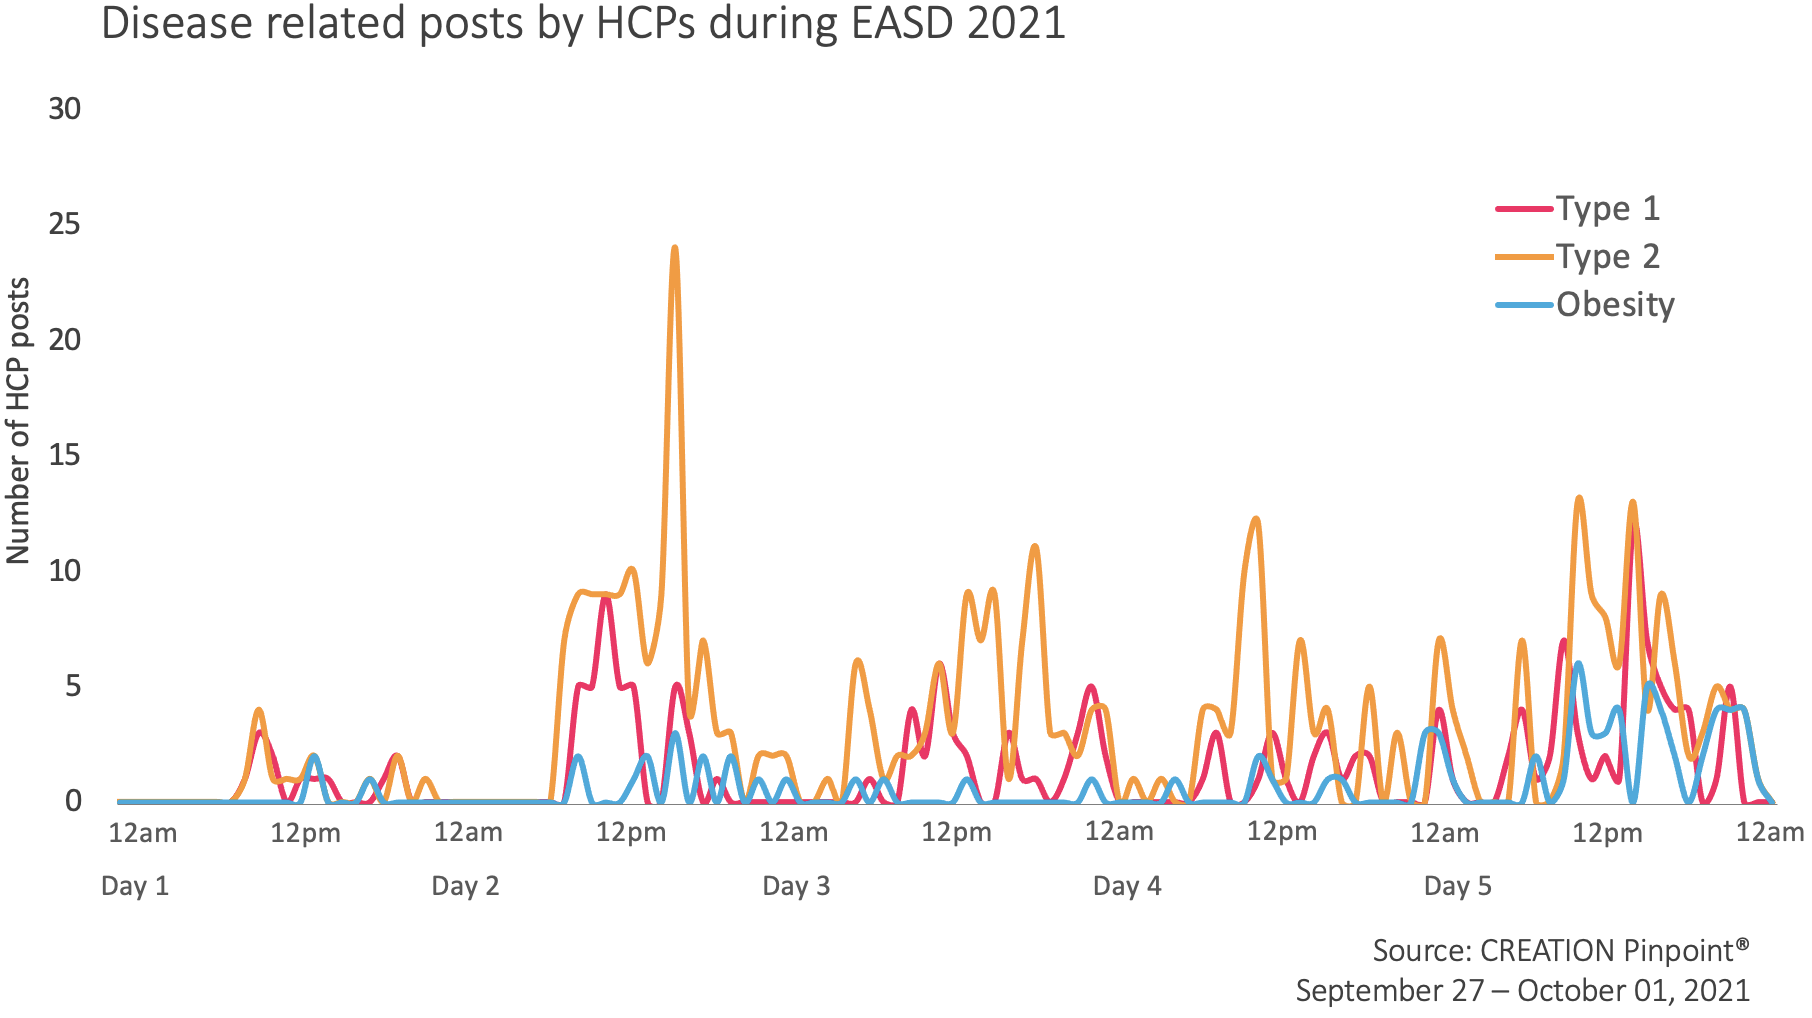 Graph showing Disease related posts by HCPs during EASD 2021